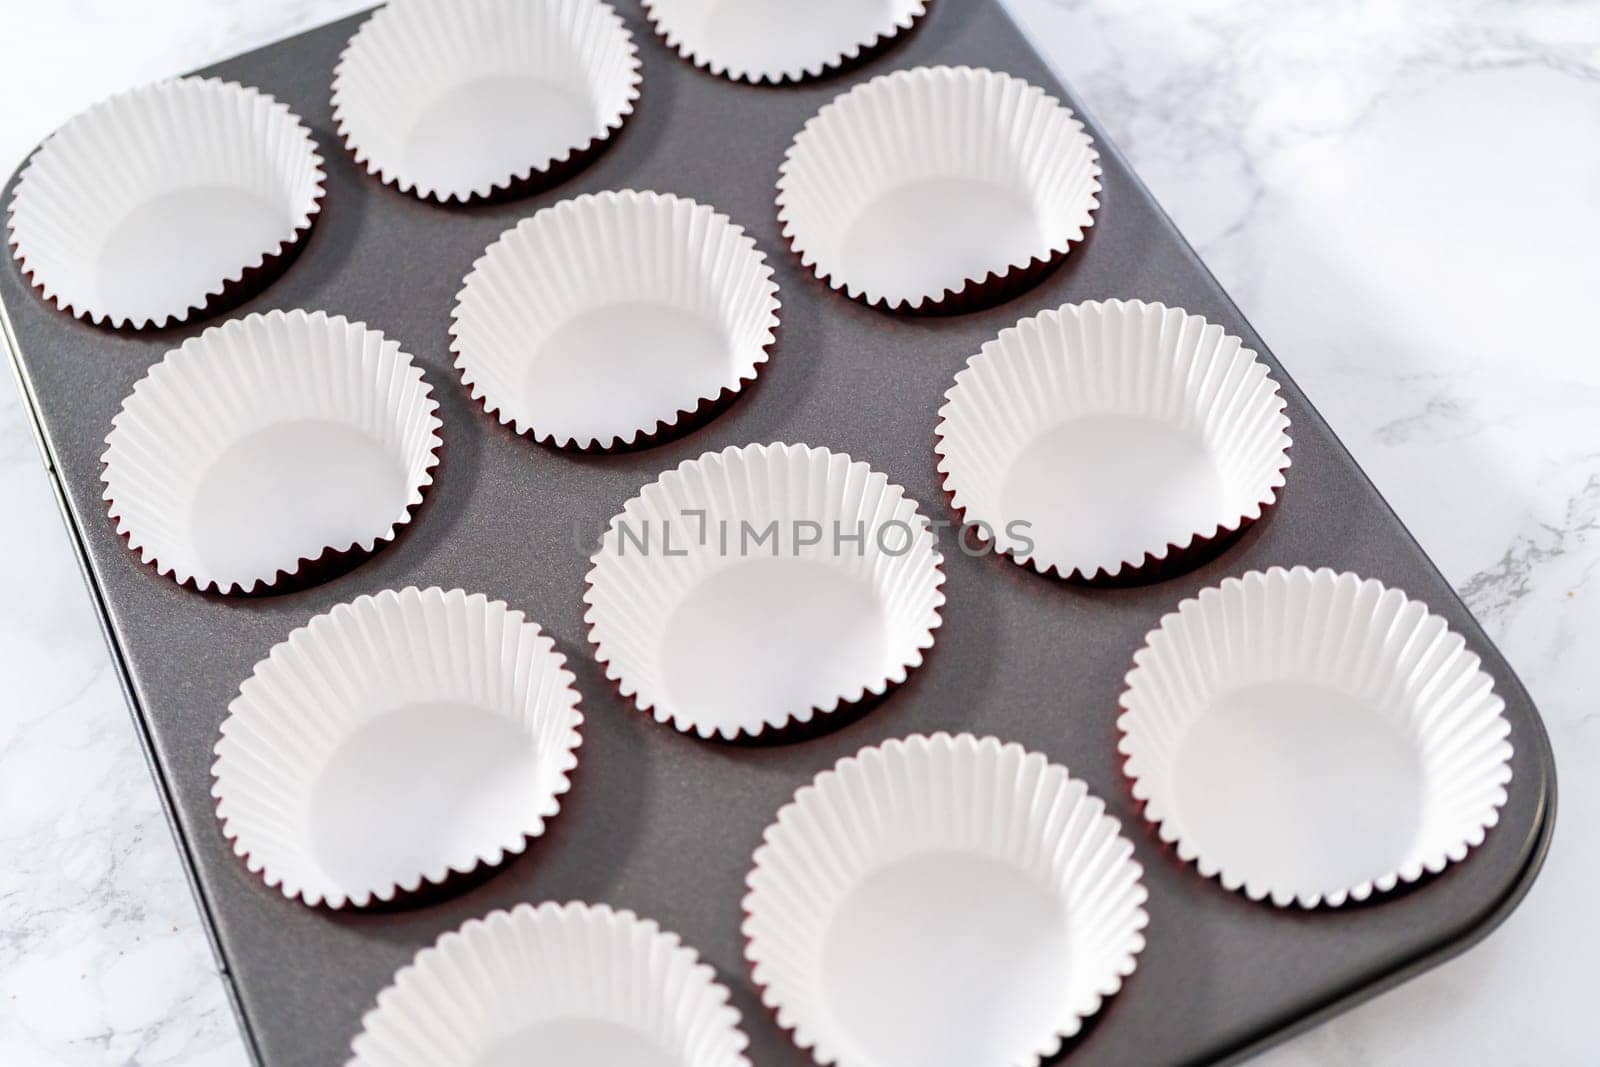 Lining cupcake pan with foil cupcake liners to bake red velvet cupcakes with white chocolate ganache frosting.